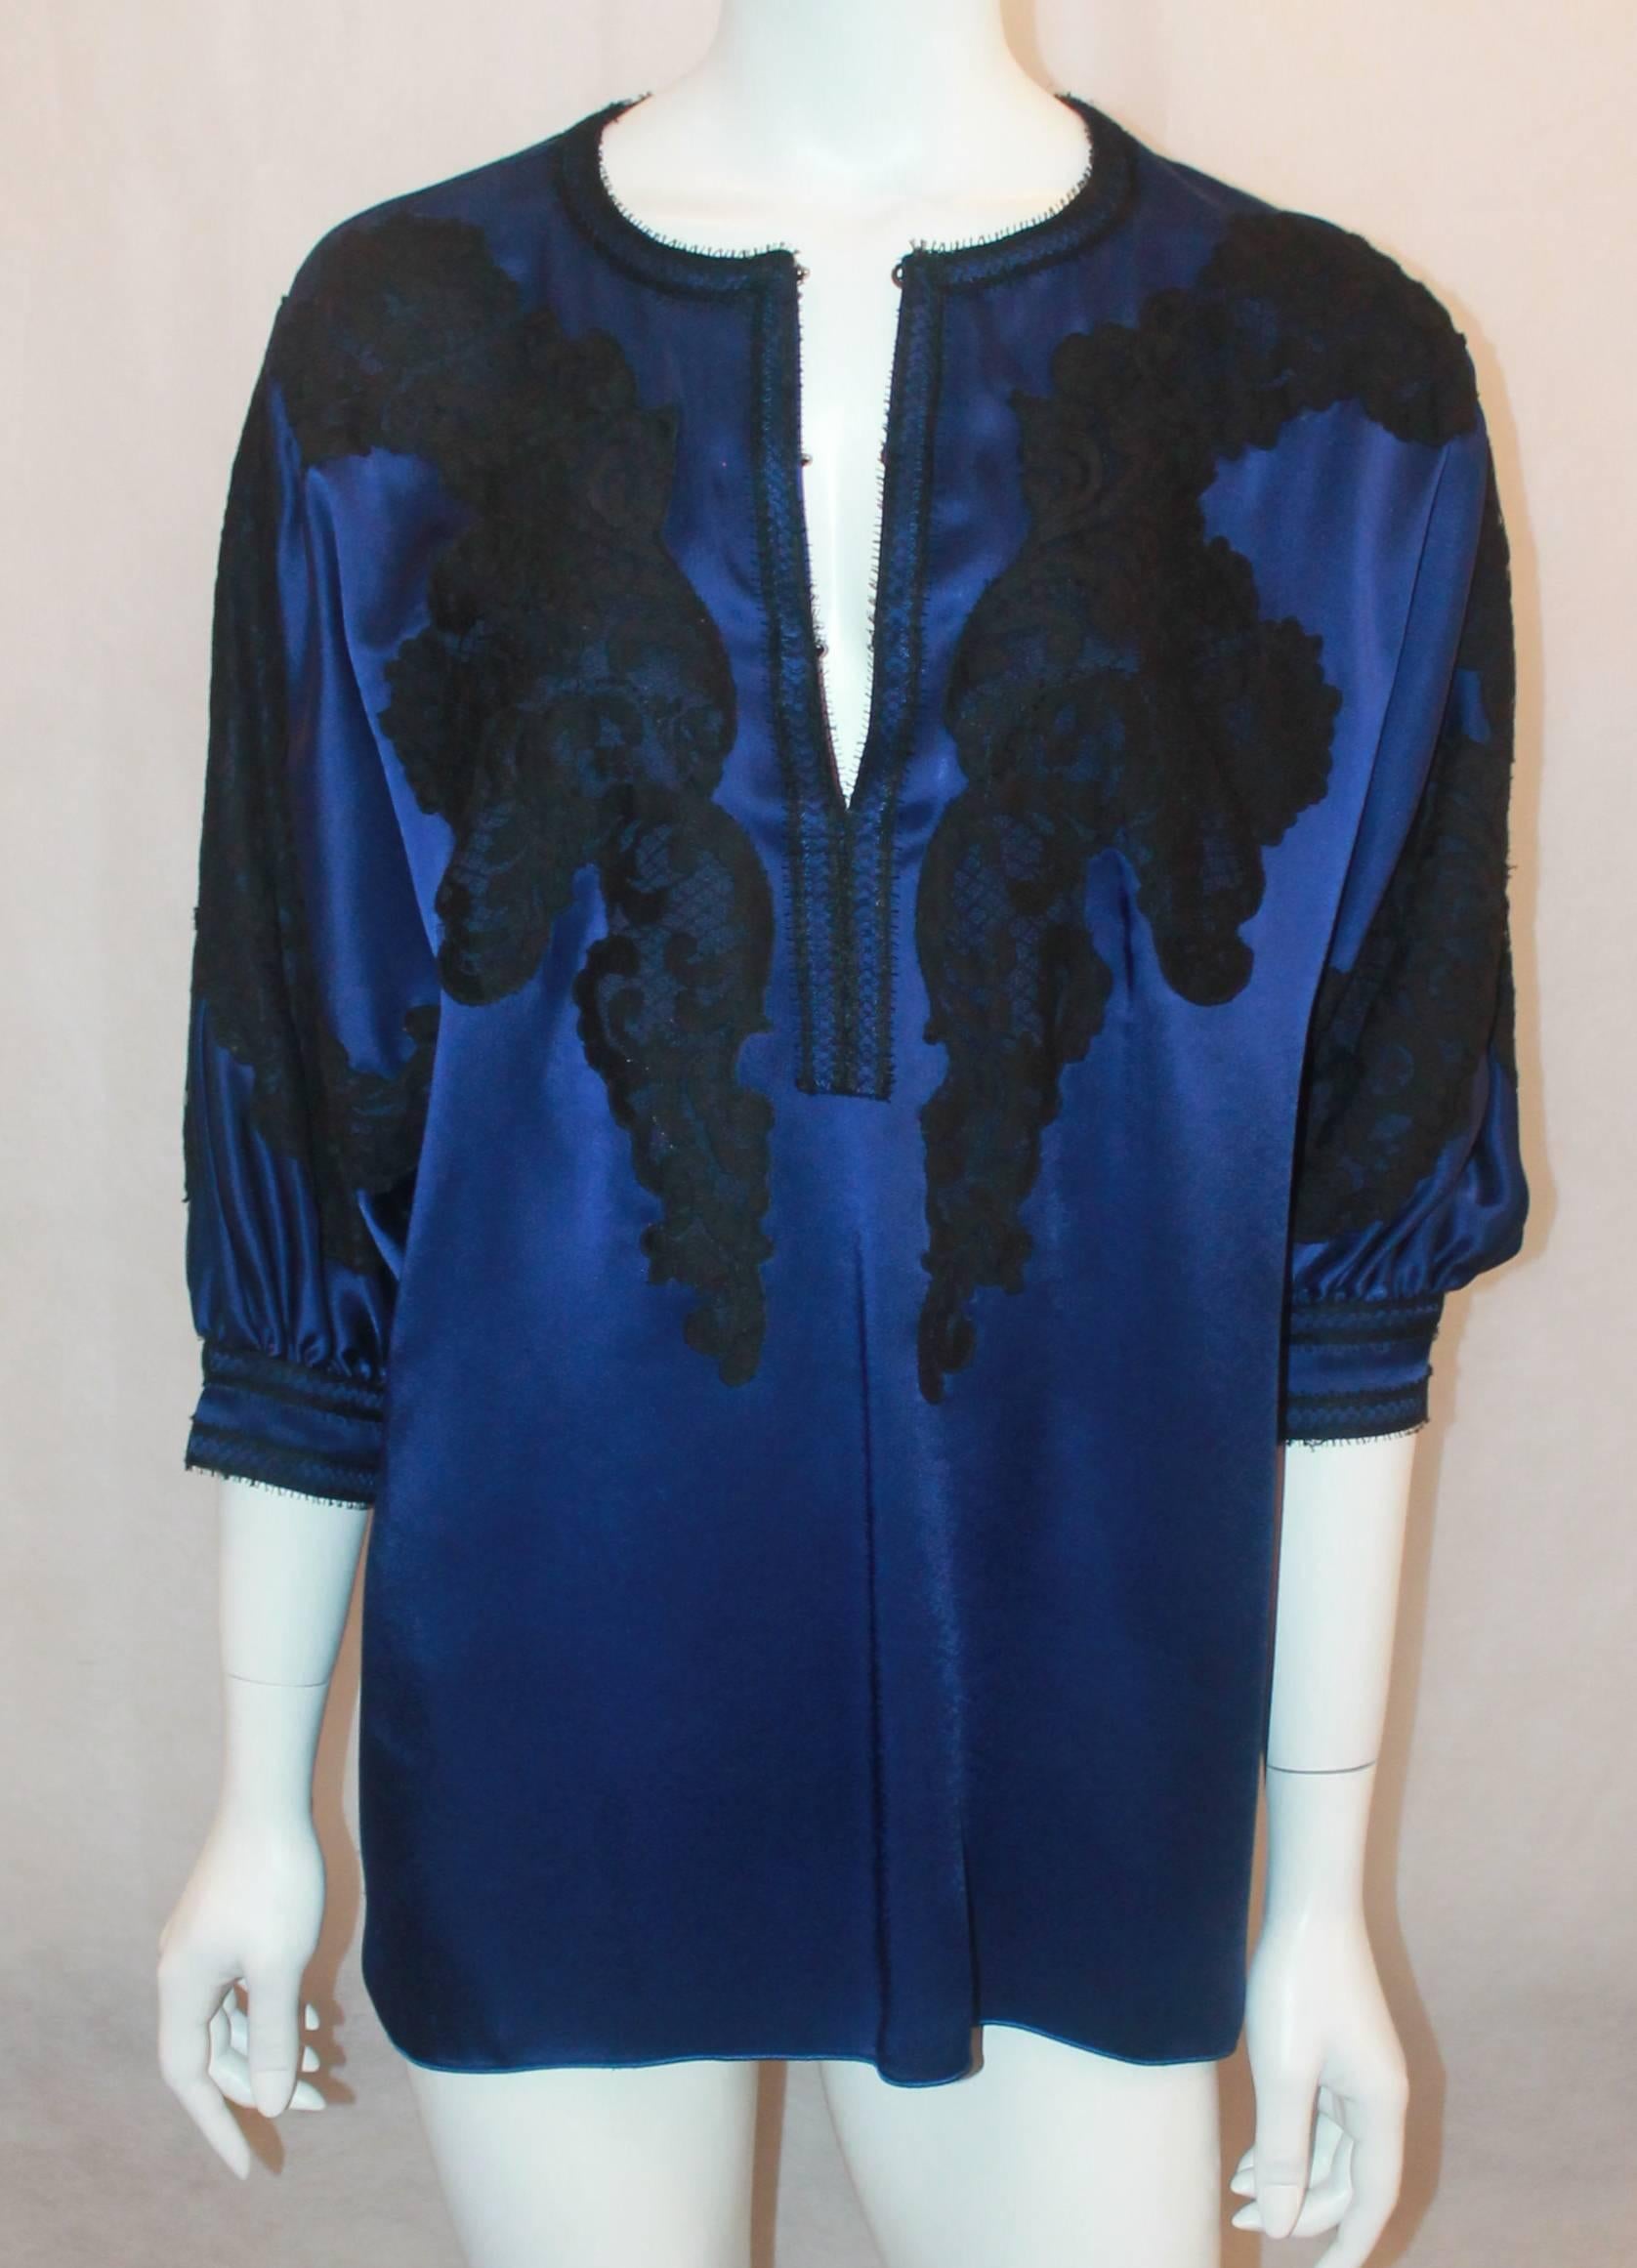 Andrew GN Blue & Black Silk Tunic Top with Lace Detail - 40. This top is good condition with some faint stains on the front on the very bottom. The blouse features 3/4 sleeves, black lace trim, and hook & eye closures on the front